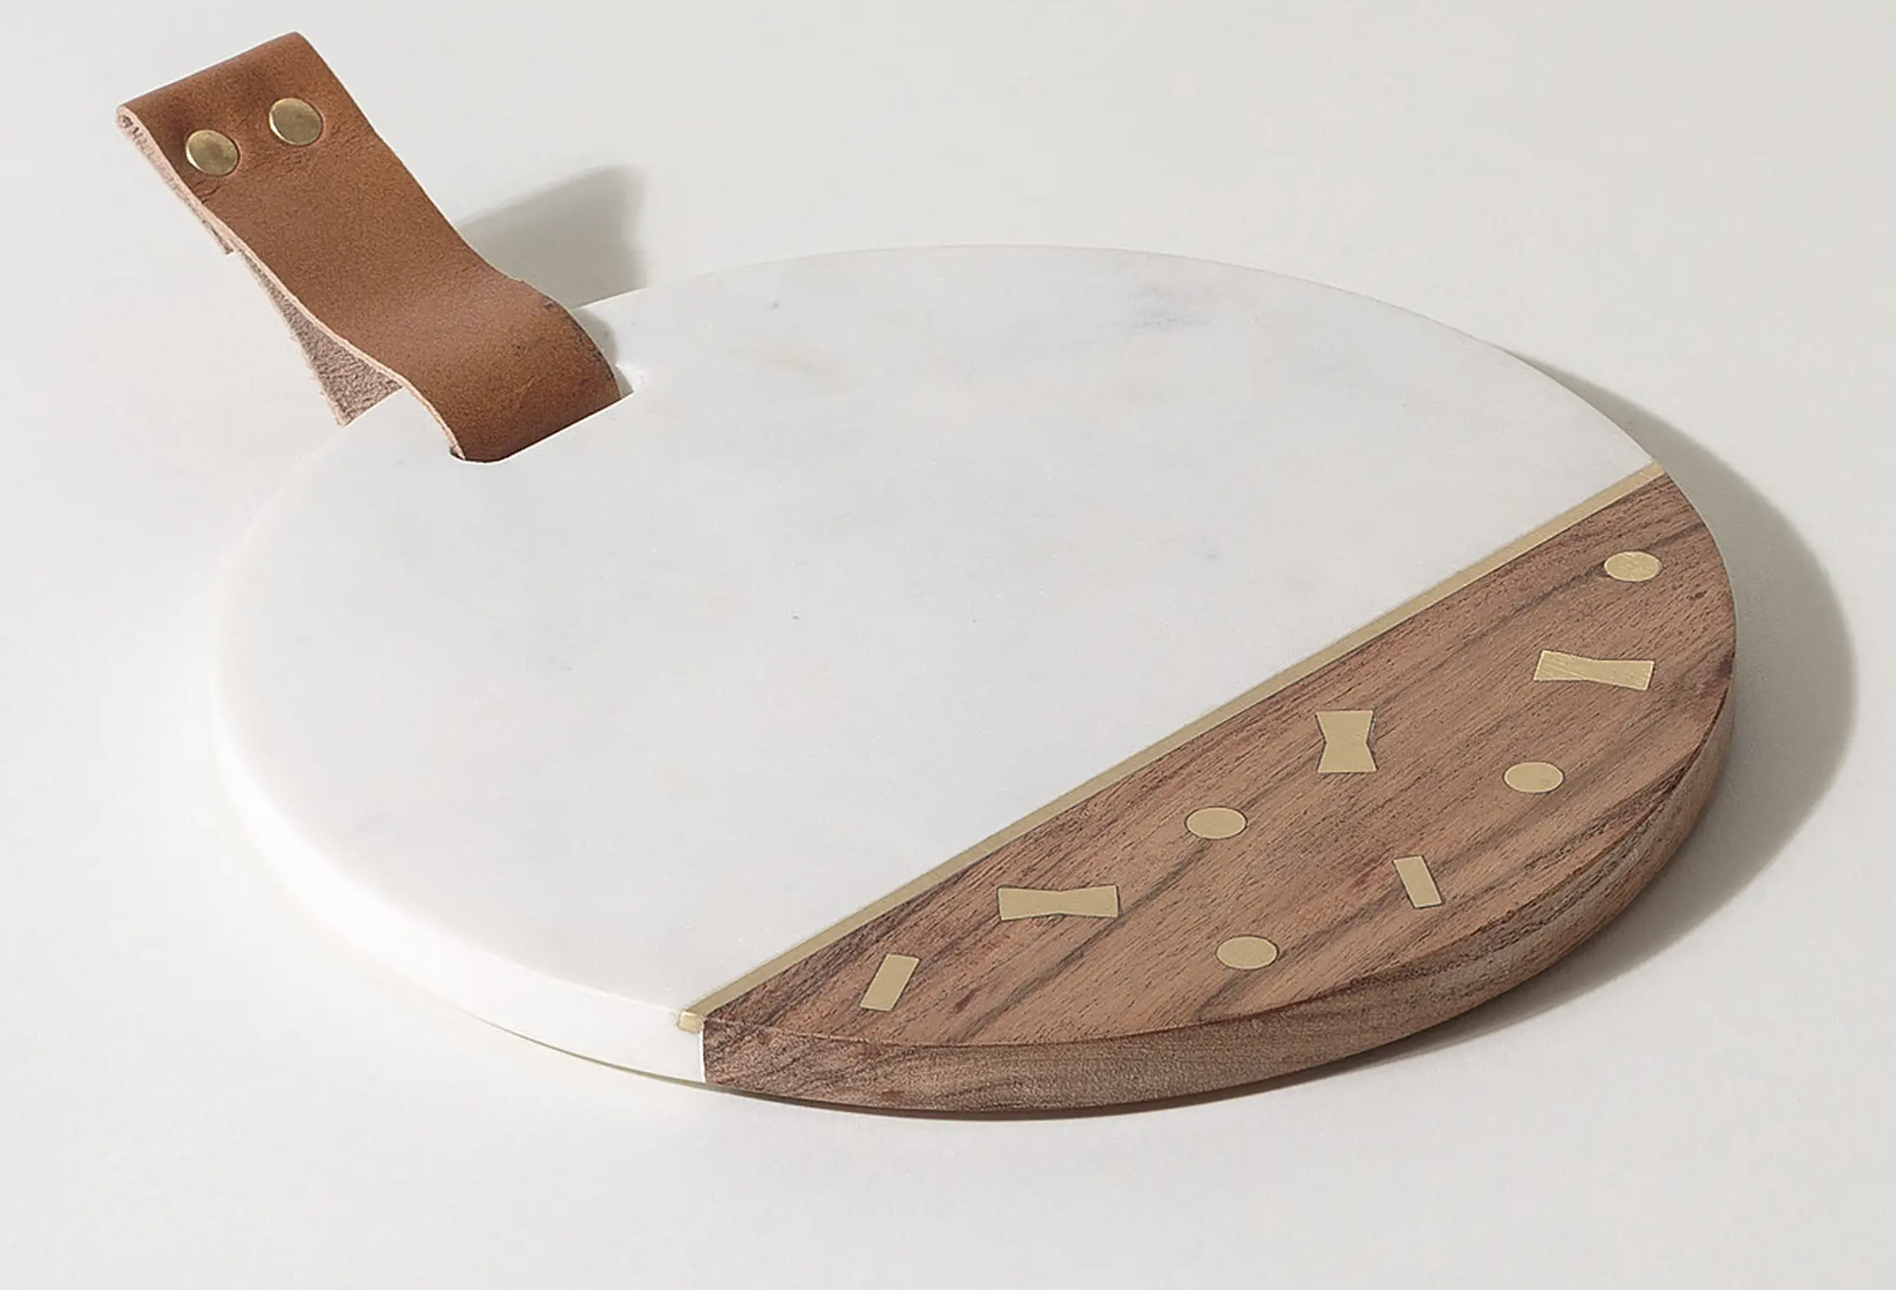 A white marble and wood chopping board with a leather handle and a gold-coloured metal strip separating the wood from the marble